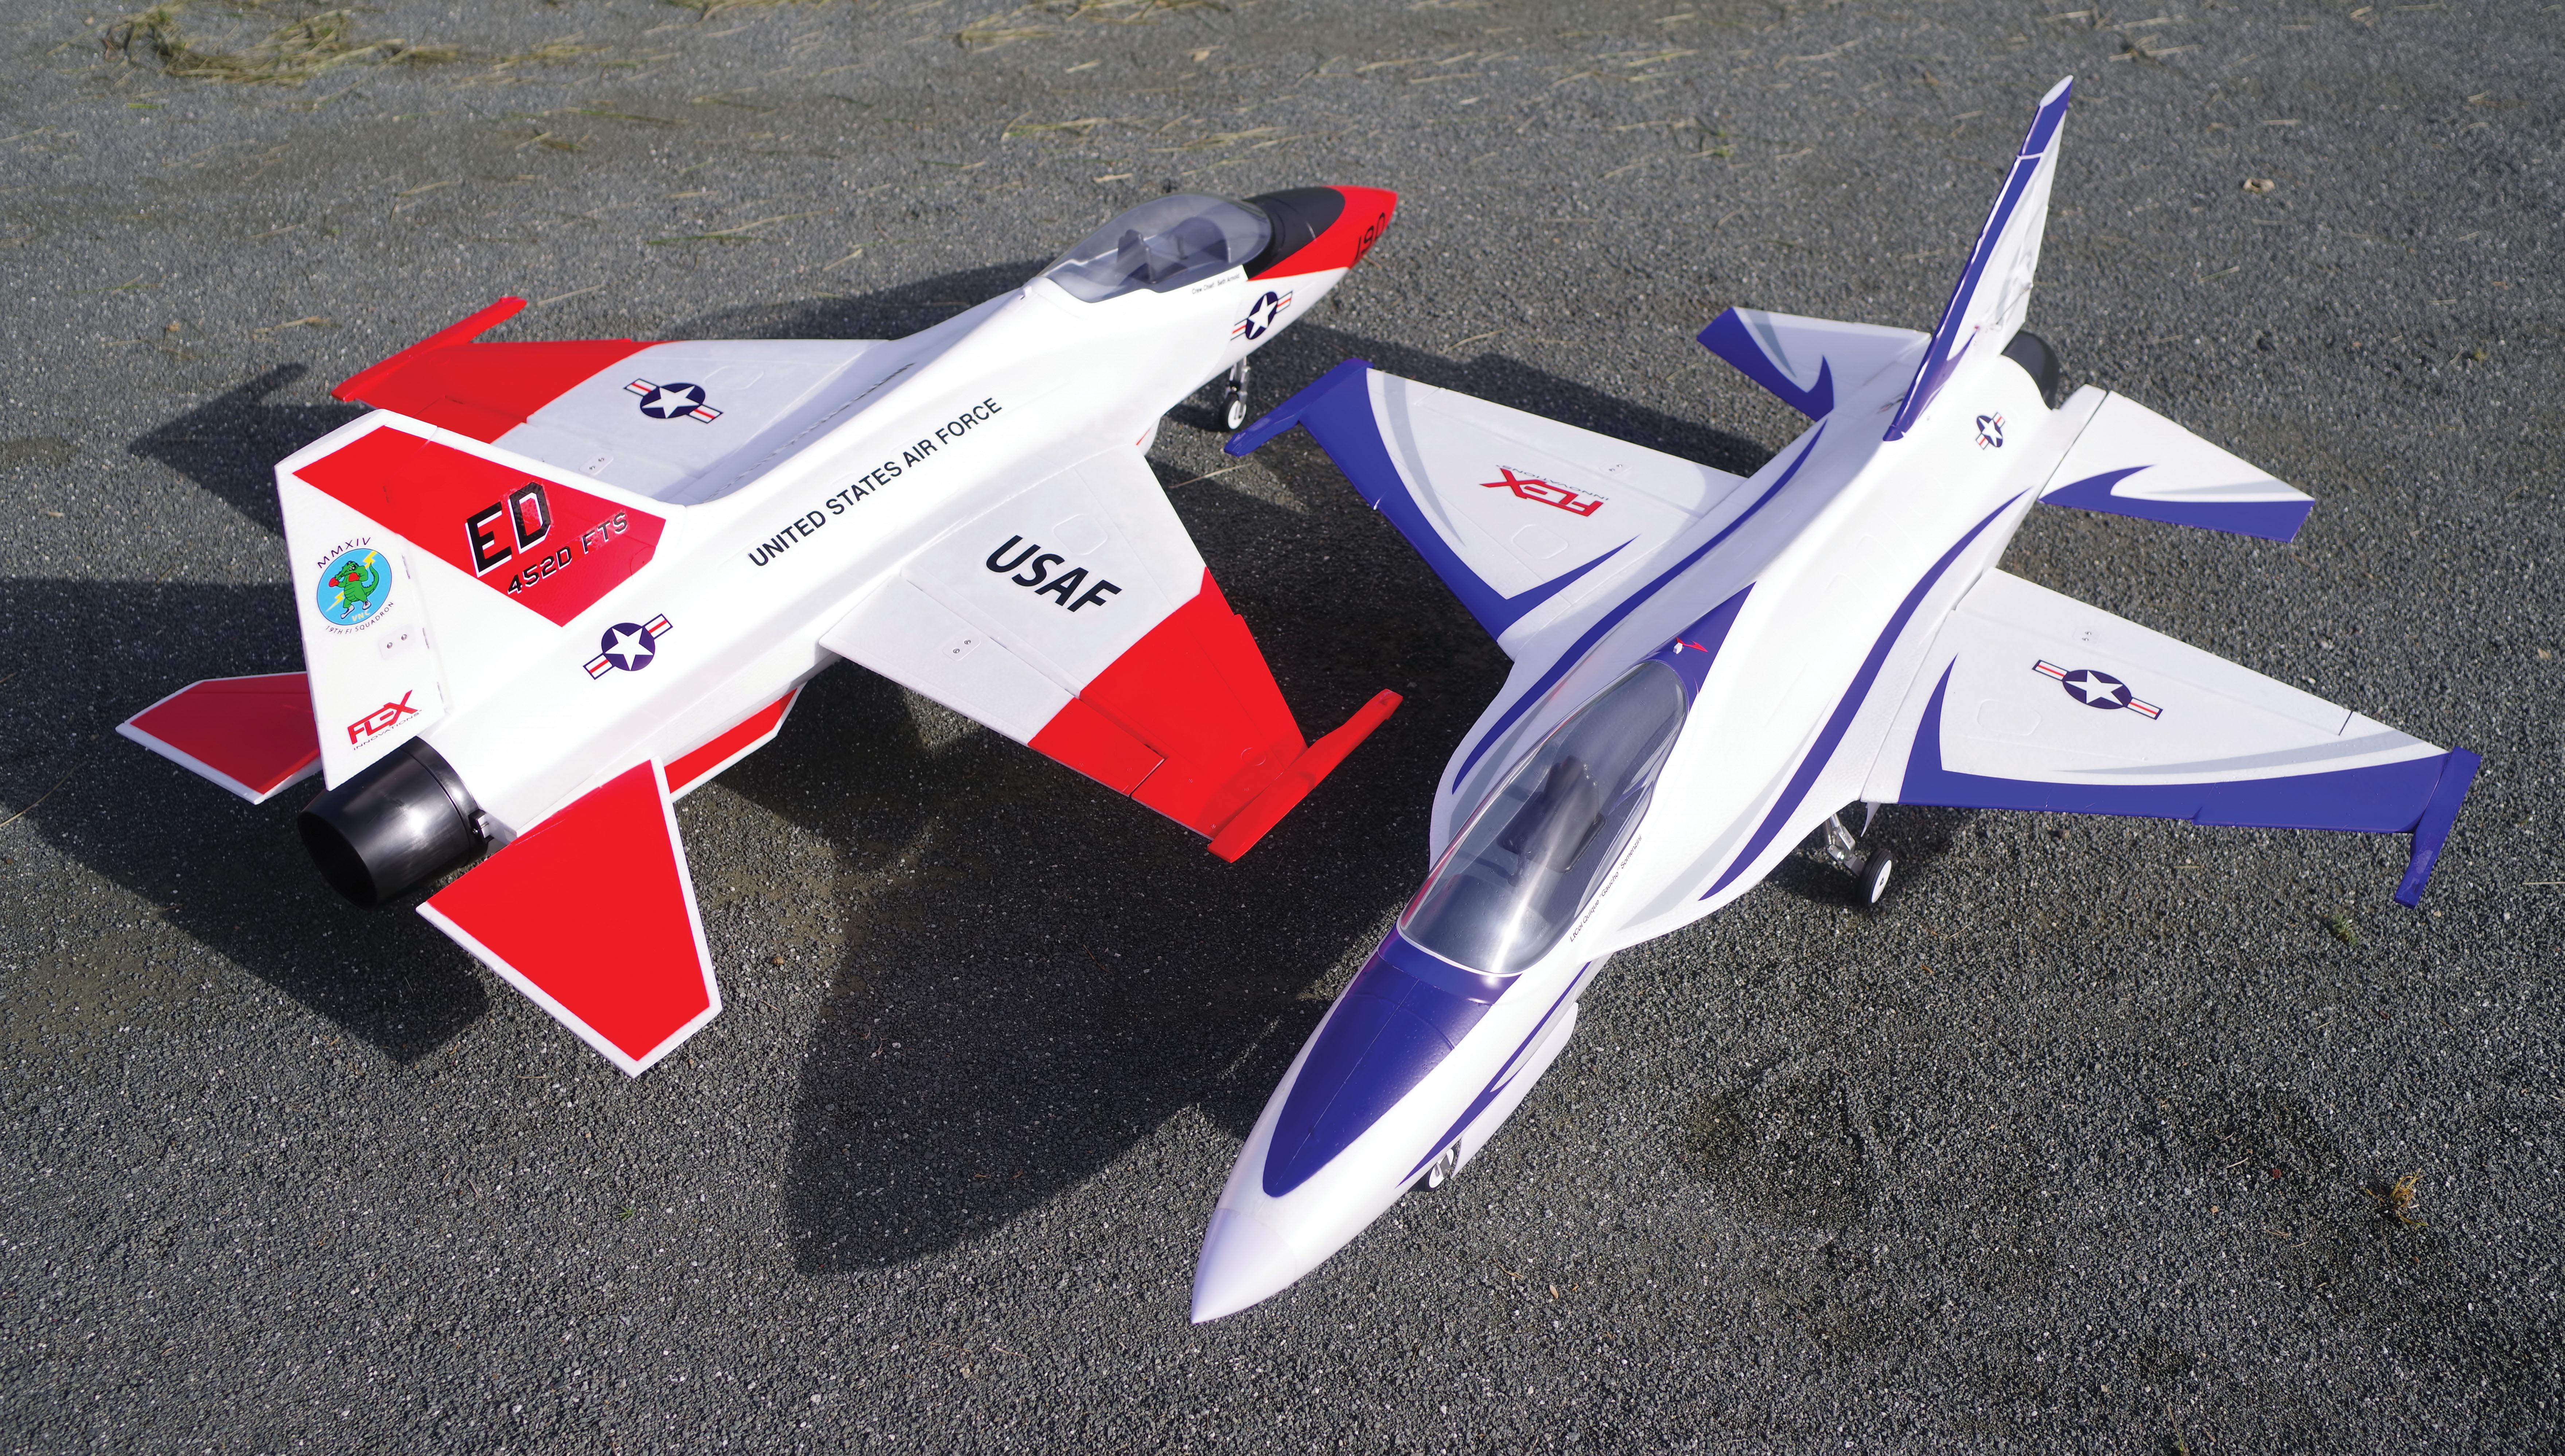 Mini Edf Jet: Building and Flying: Tips and Resources for Mini EDF Jets